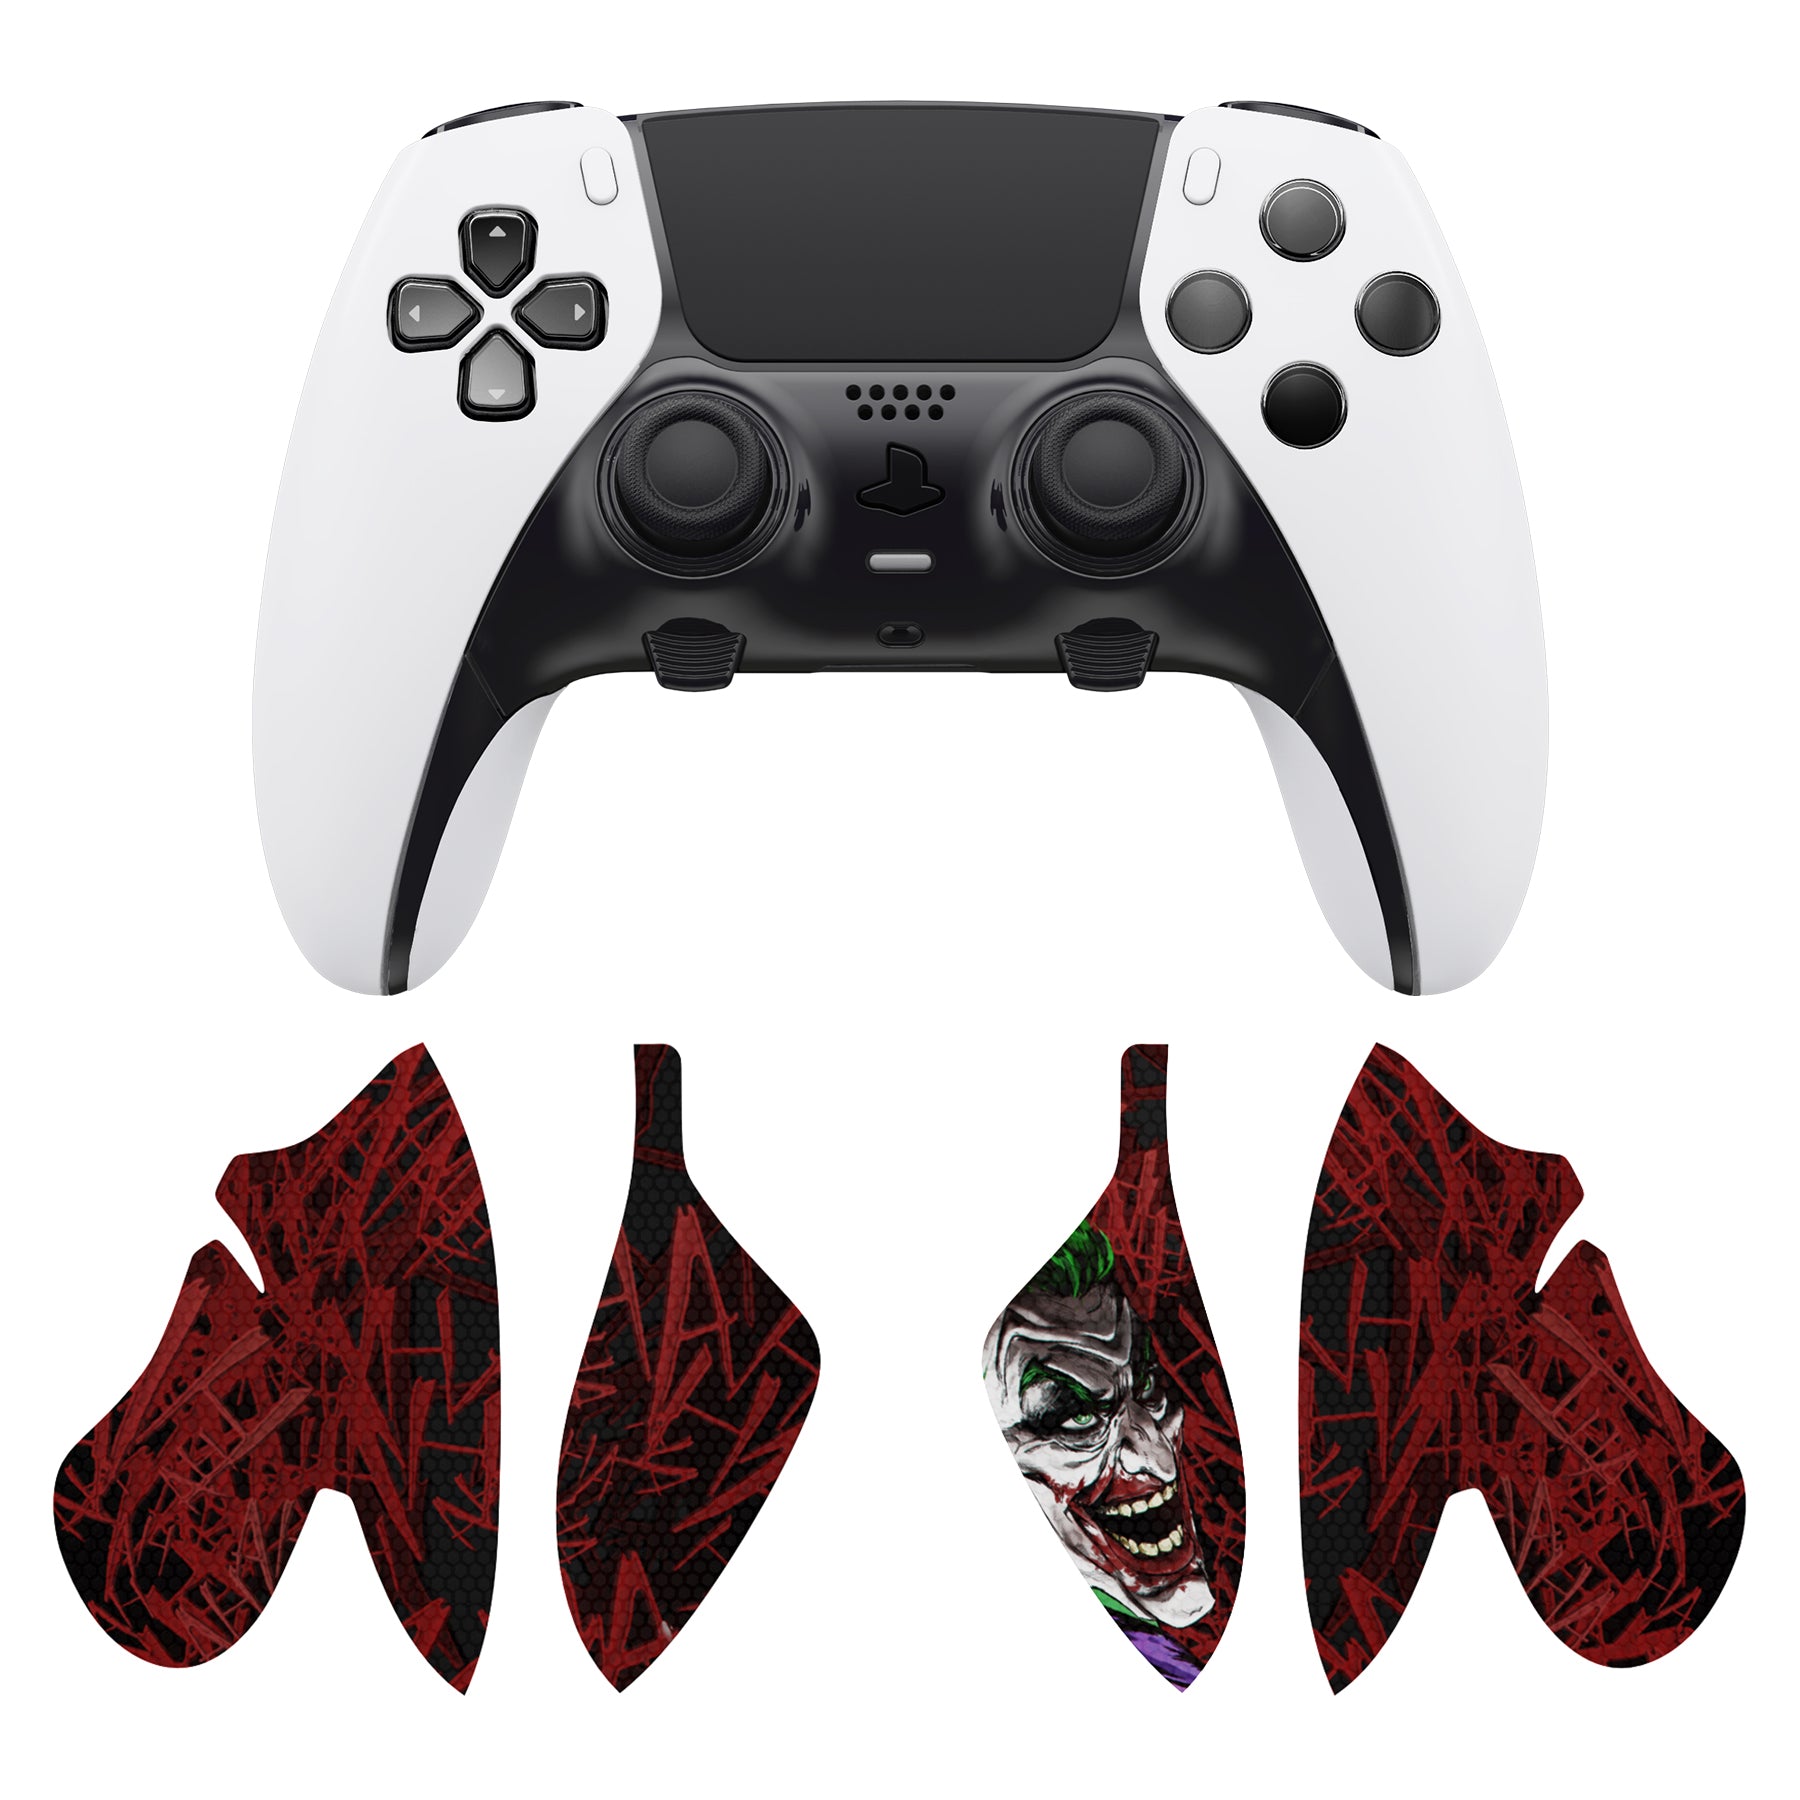 PlayVital Anti-Skid Sweat-Absorbent Controller Grip for ps5 Edge Wireless Controller, Professional Textured Soft PU Handle Grips Anti Sweat Protector for ps5 Edge Controller - Clown Hahaha - PFPJ148 PlayVital